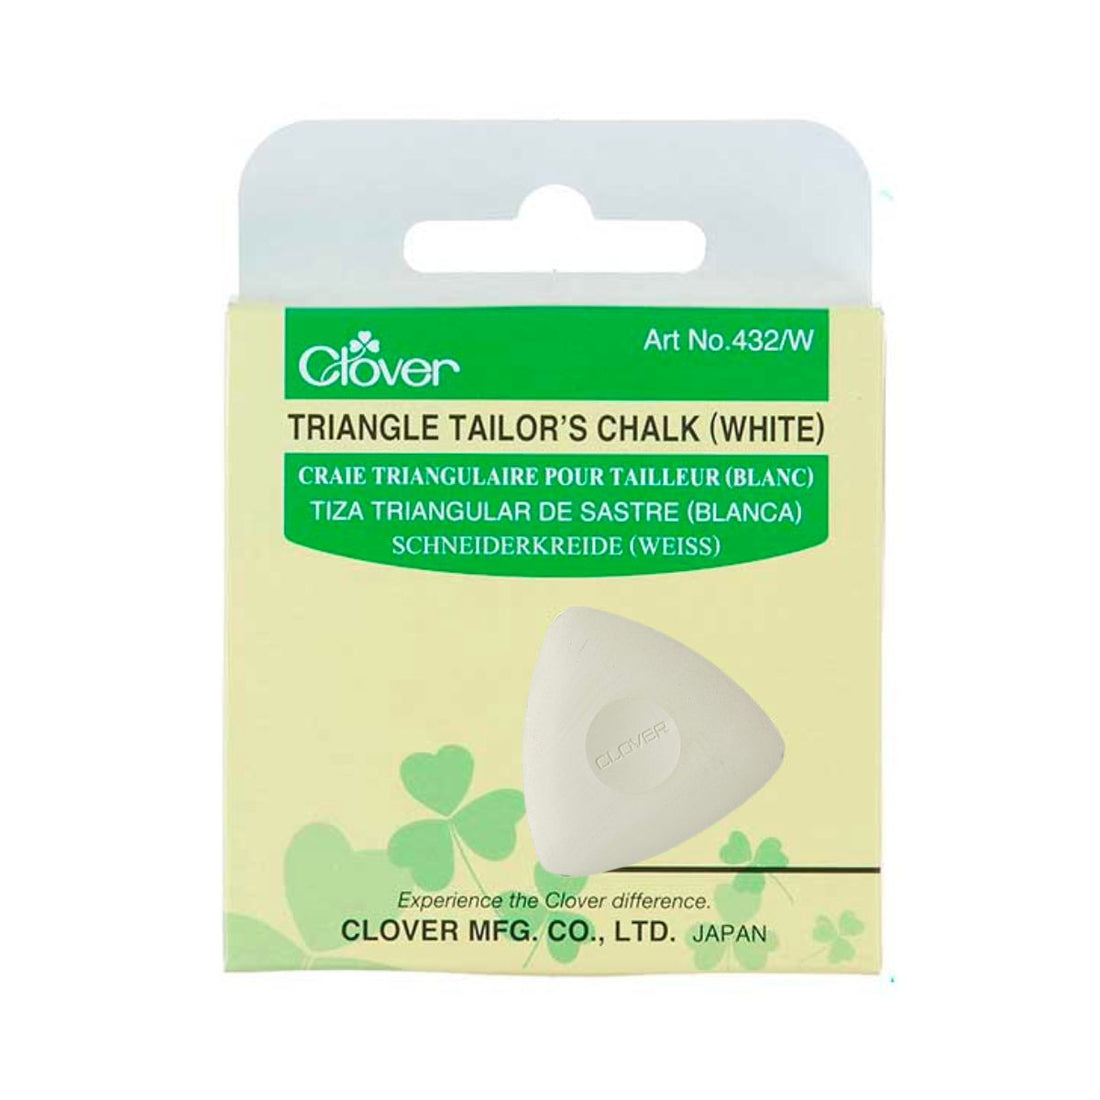 clover triangle tailors chalk white